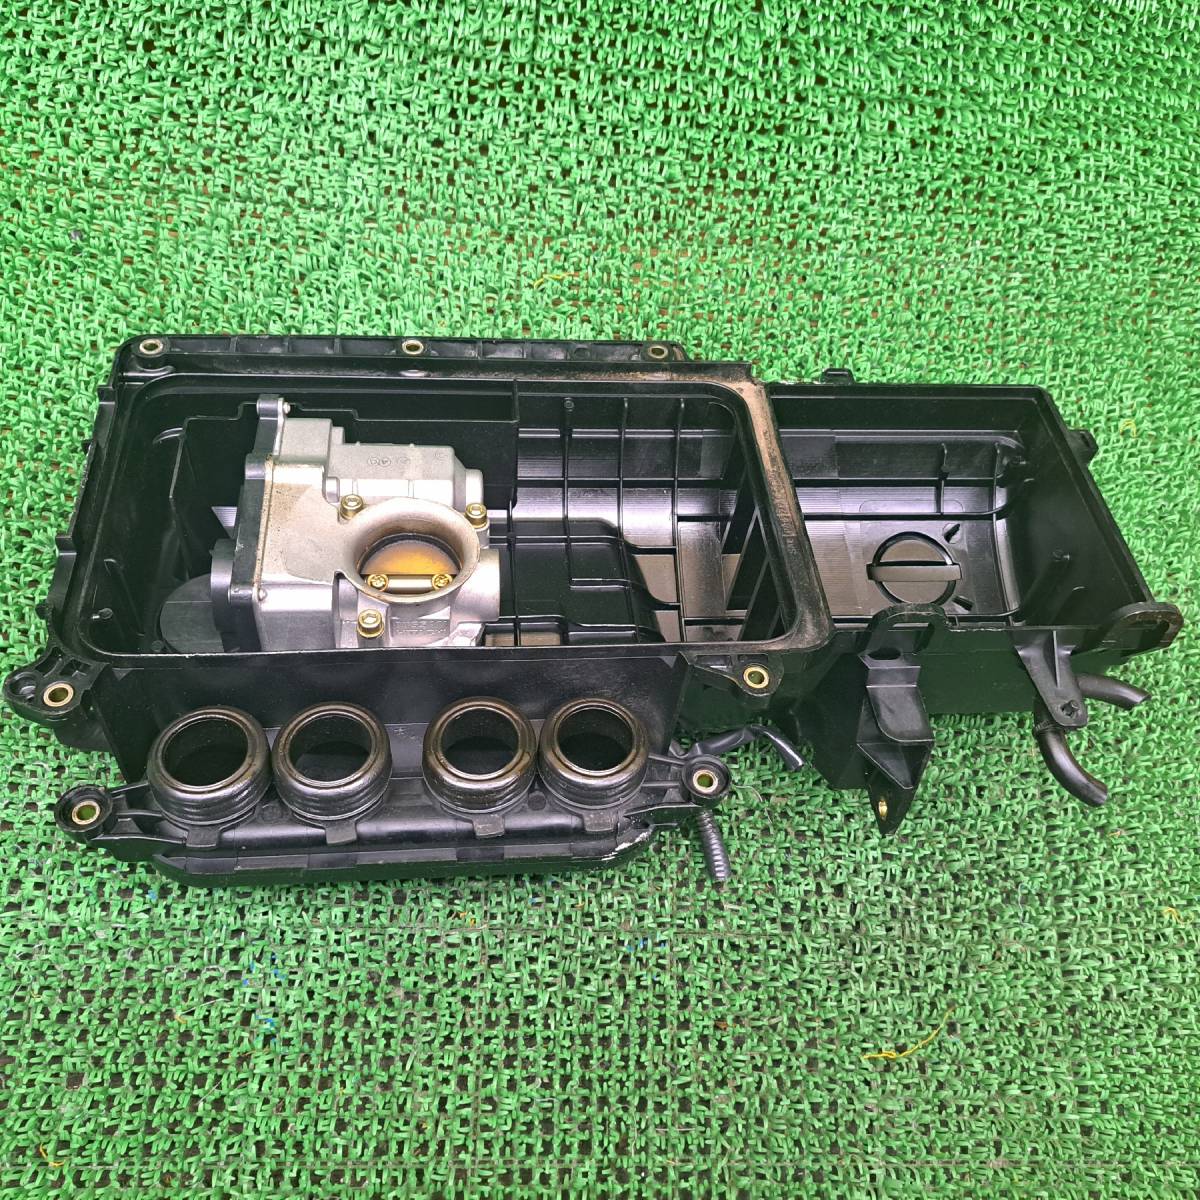  Nissan March AK12 K12 throttle throttle body - chamber accelerator control cover engine cover 